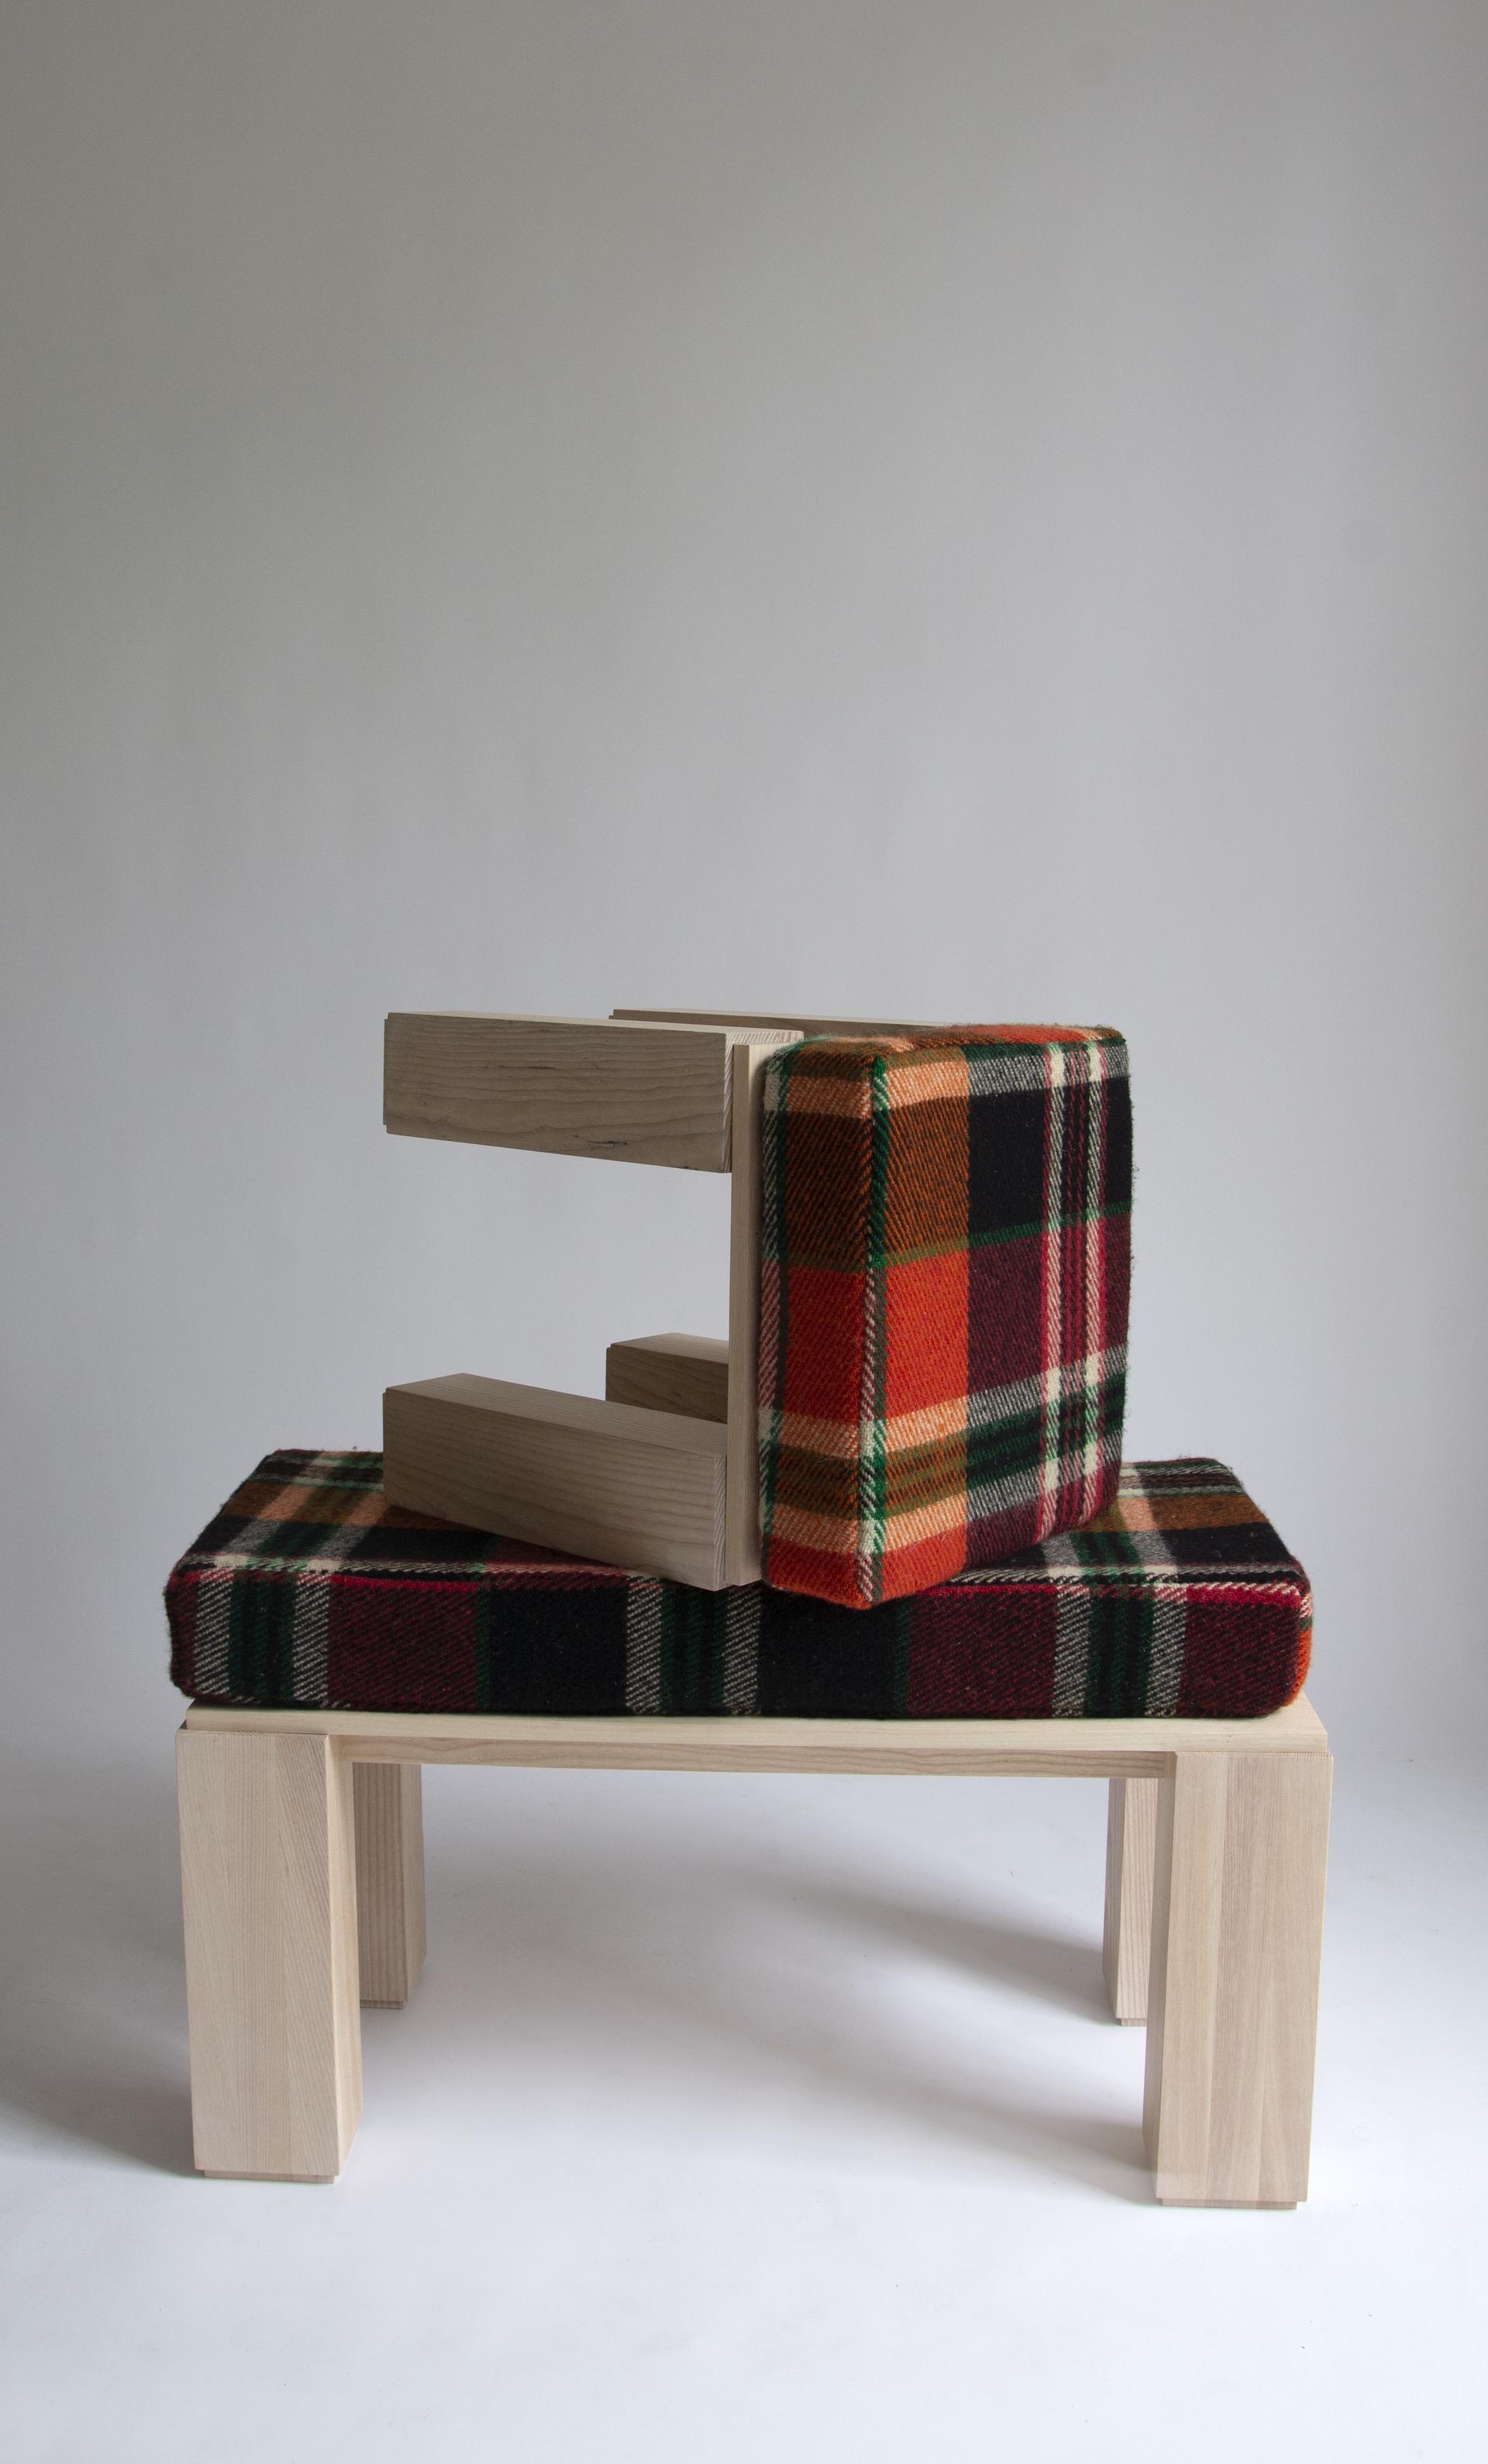 Wooden stool with orange, green and red plaid wool cushion sits kneeled on top of wooden bench with same plaid cushion.  